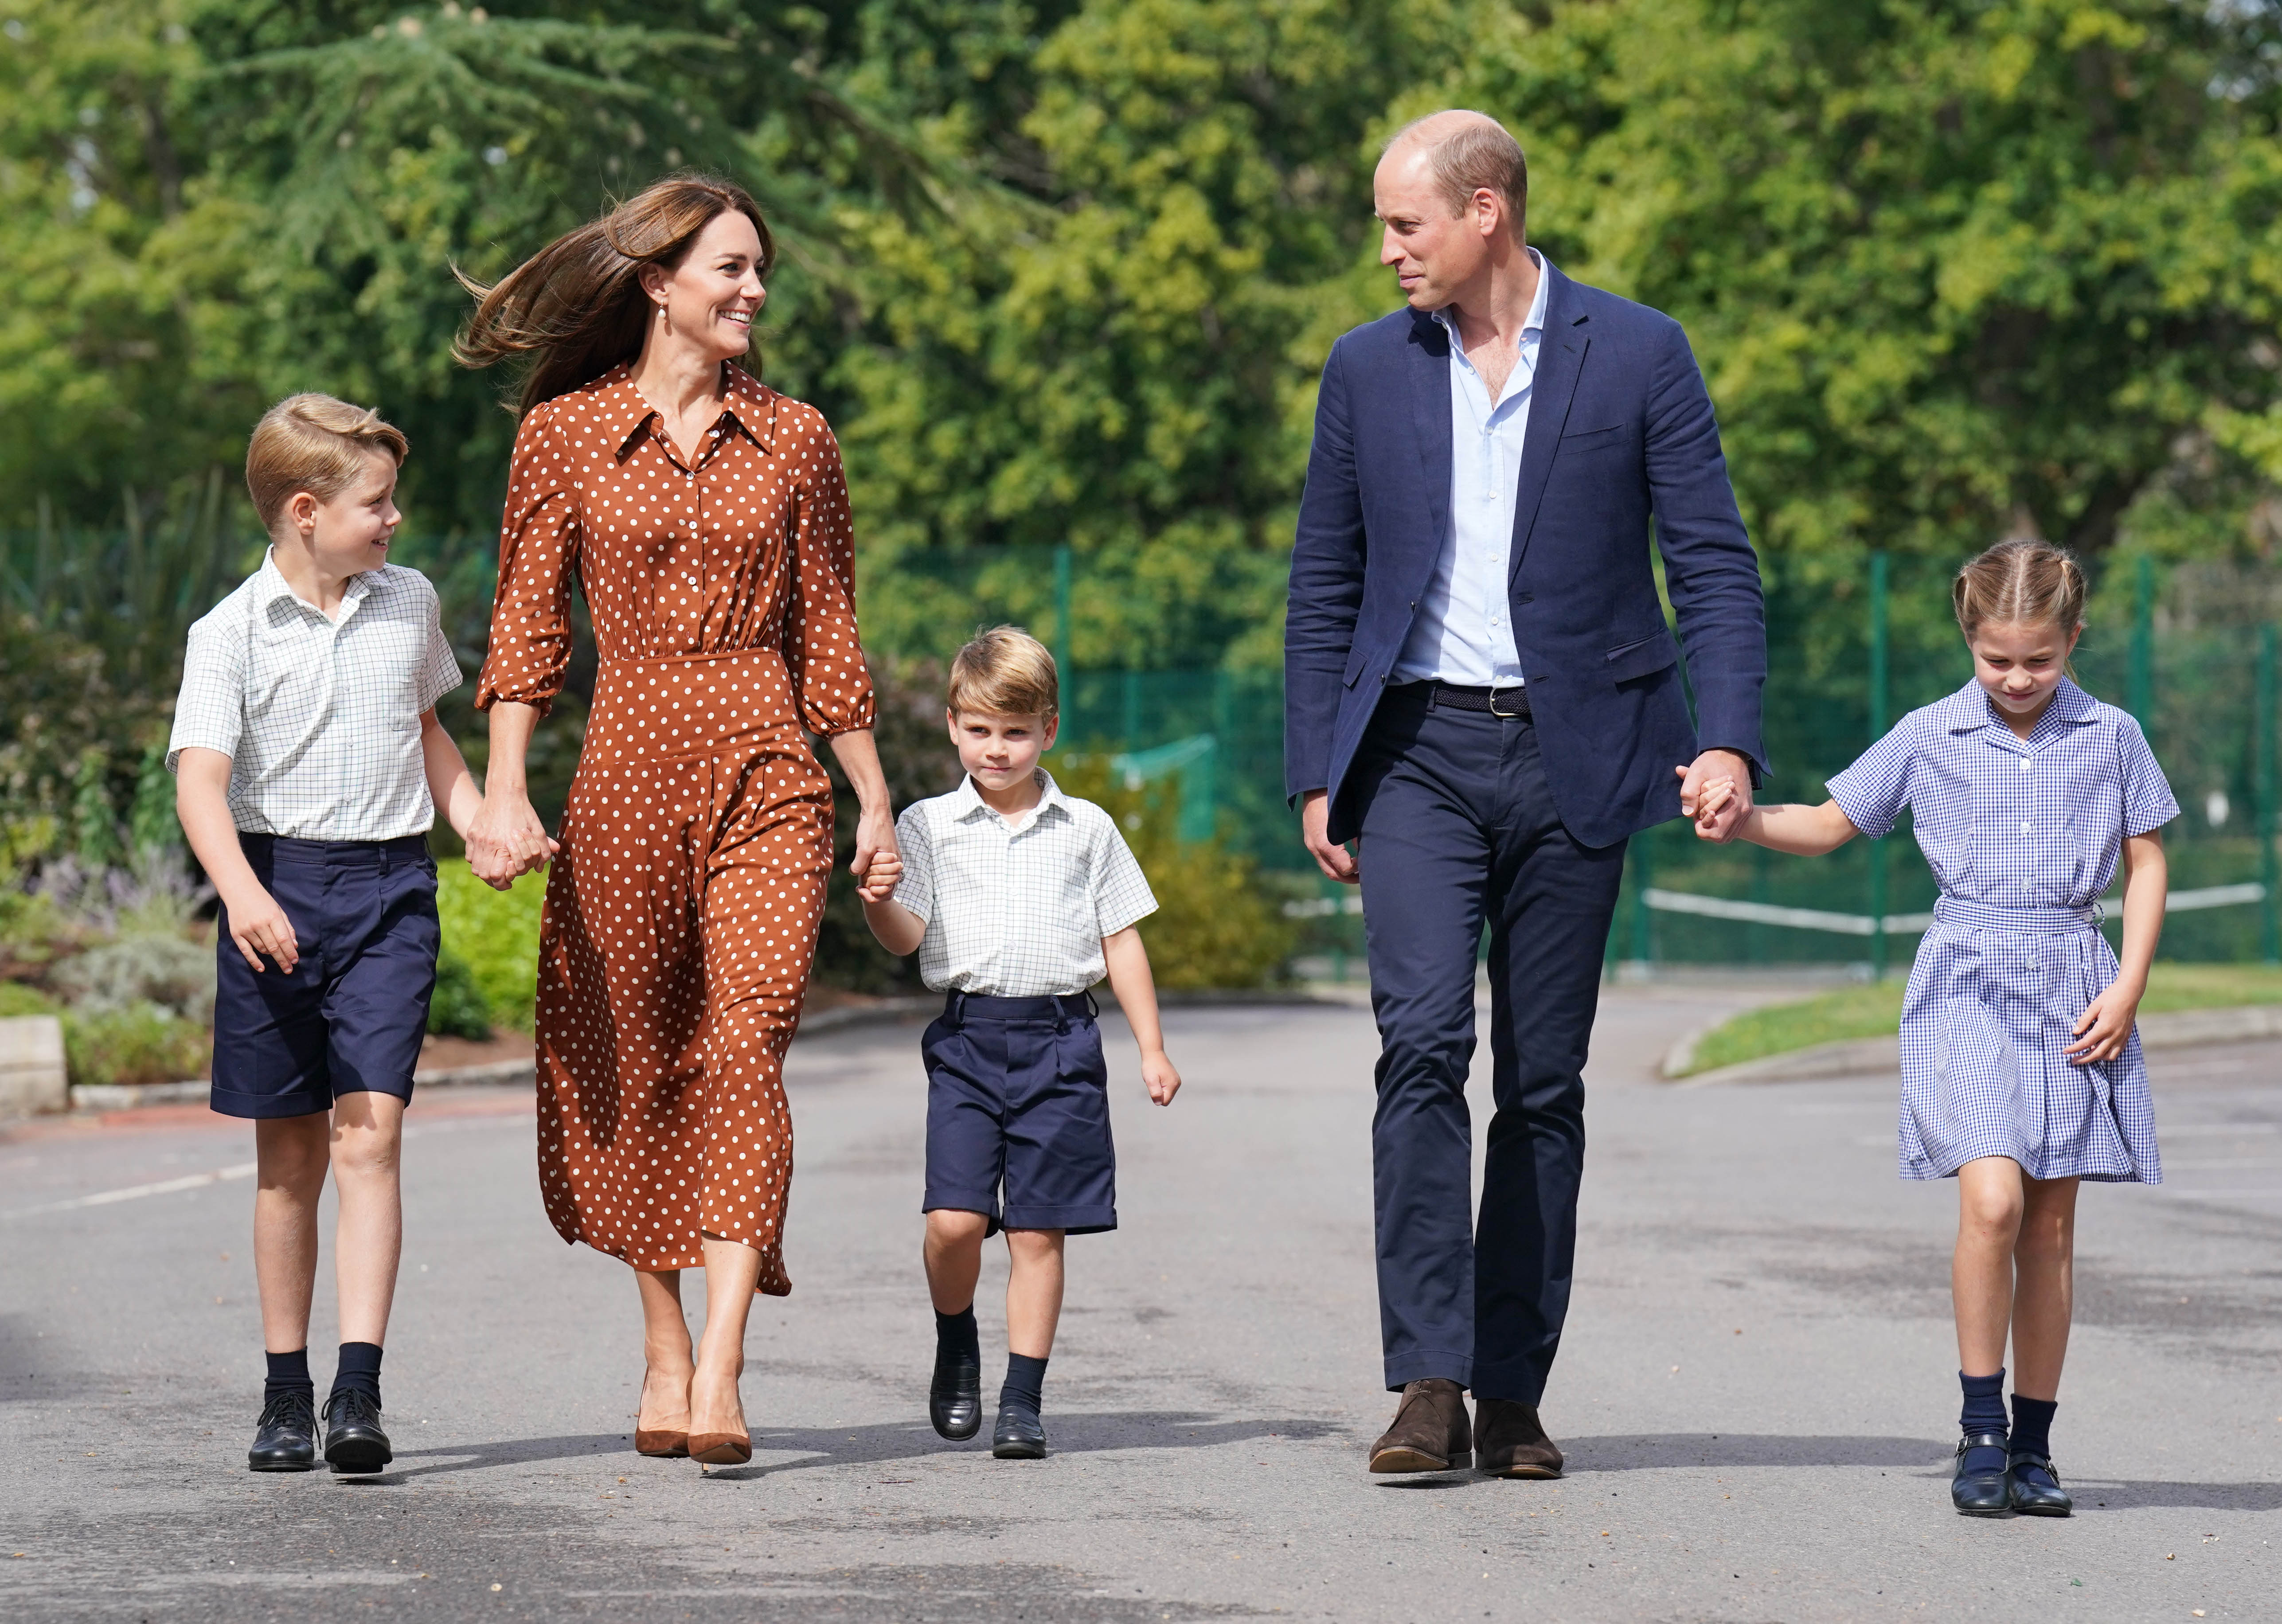 Kate Middleton (Catherine, Duchess of Cambridge), and Prince William, Duke of Cambridge accompanying their children, Prince George, Princess Charlotte, and Prince Louis in September 7, 2022 at Lambrook School in Bracknell, England. | Source: Getty Images